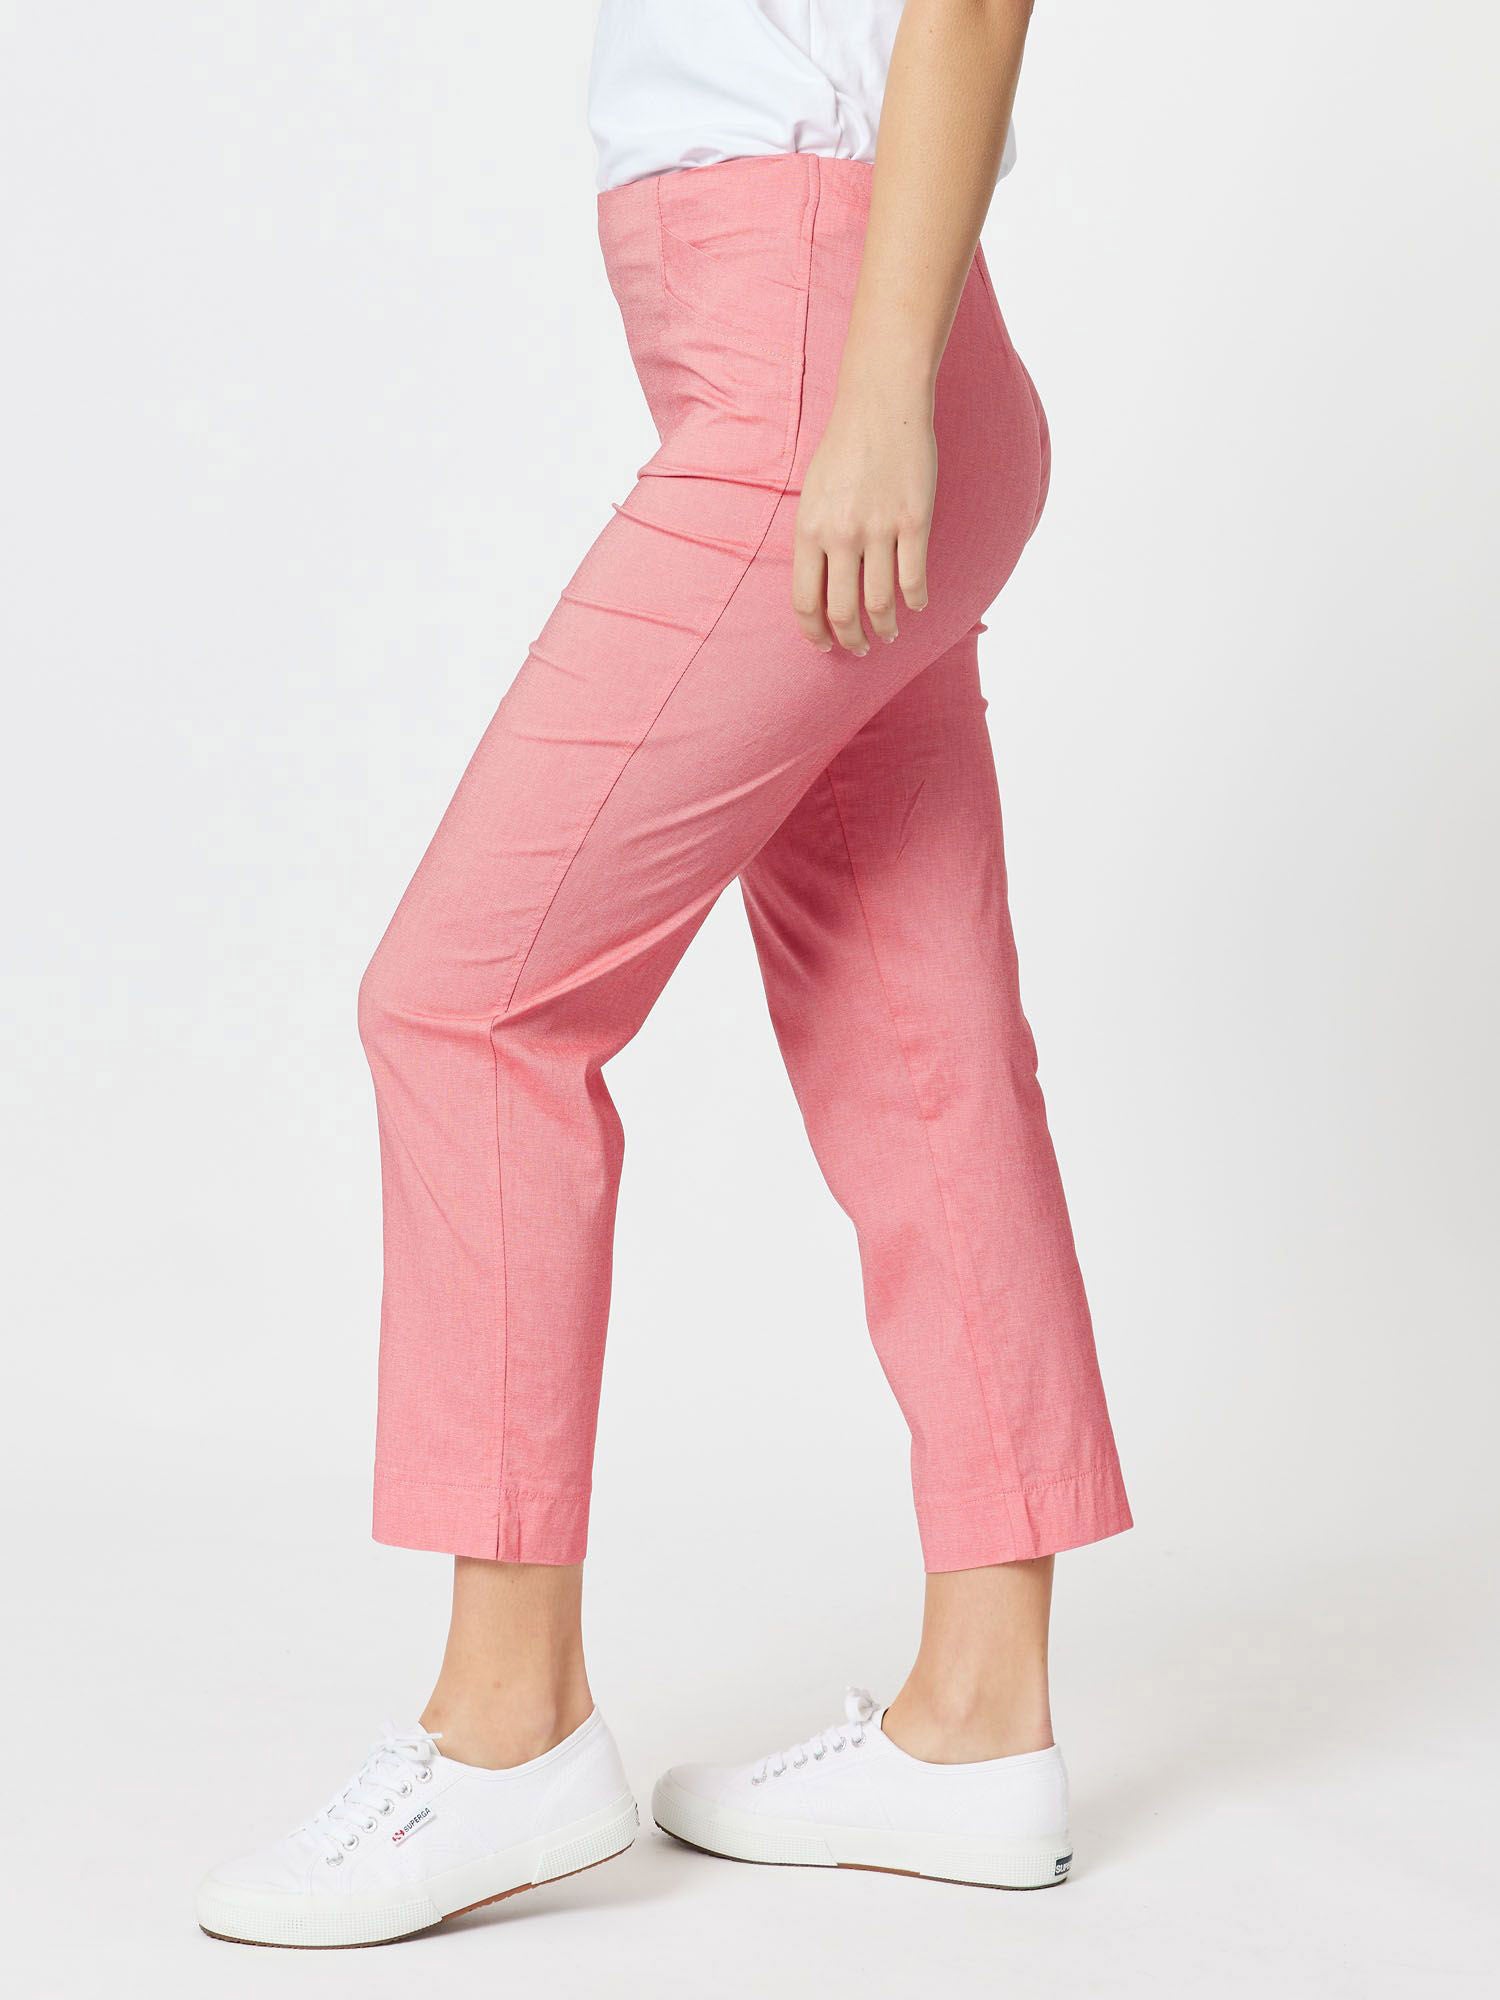 Stretch Marled Bengaline Cropped Pant - Melon